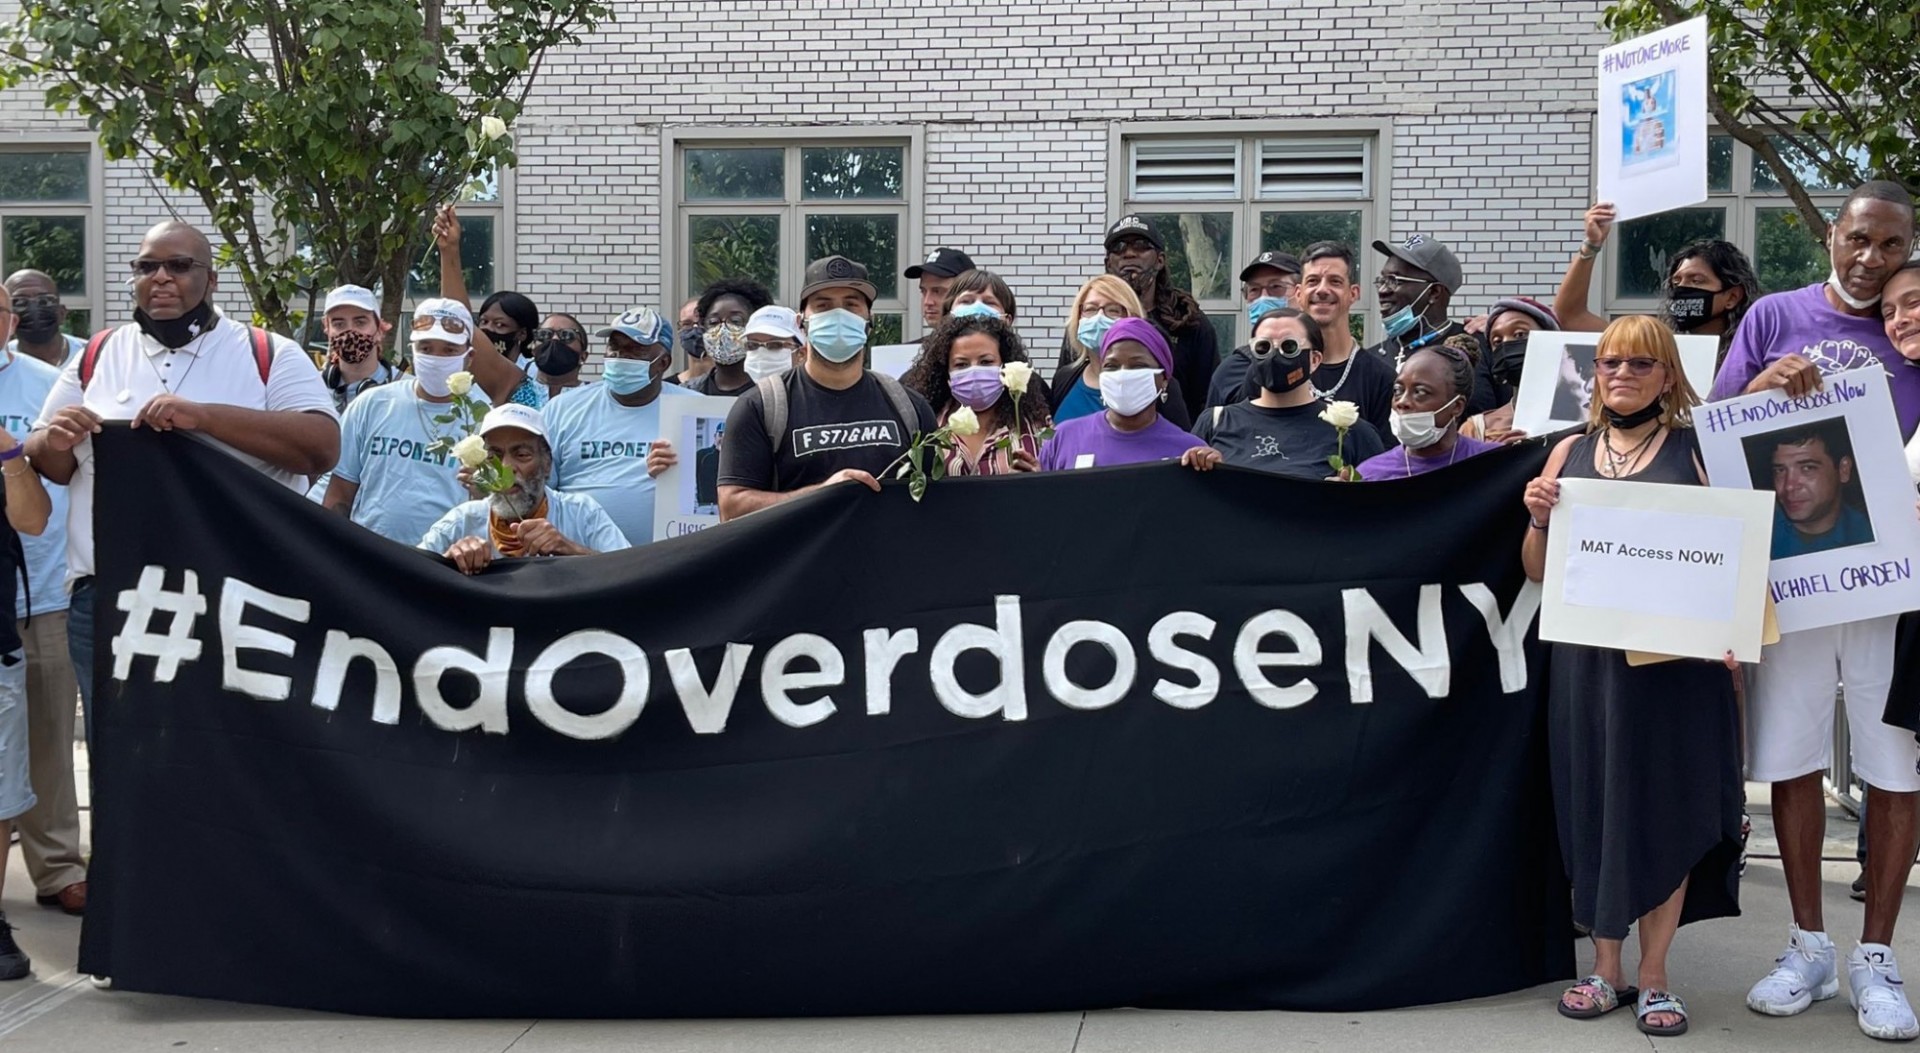 Group standing behind end overdose sign 